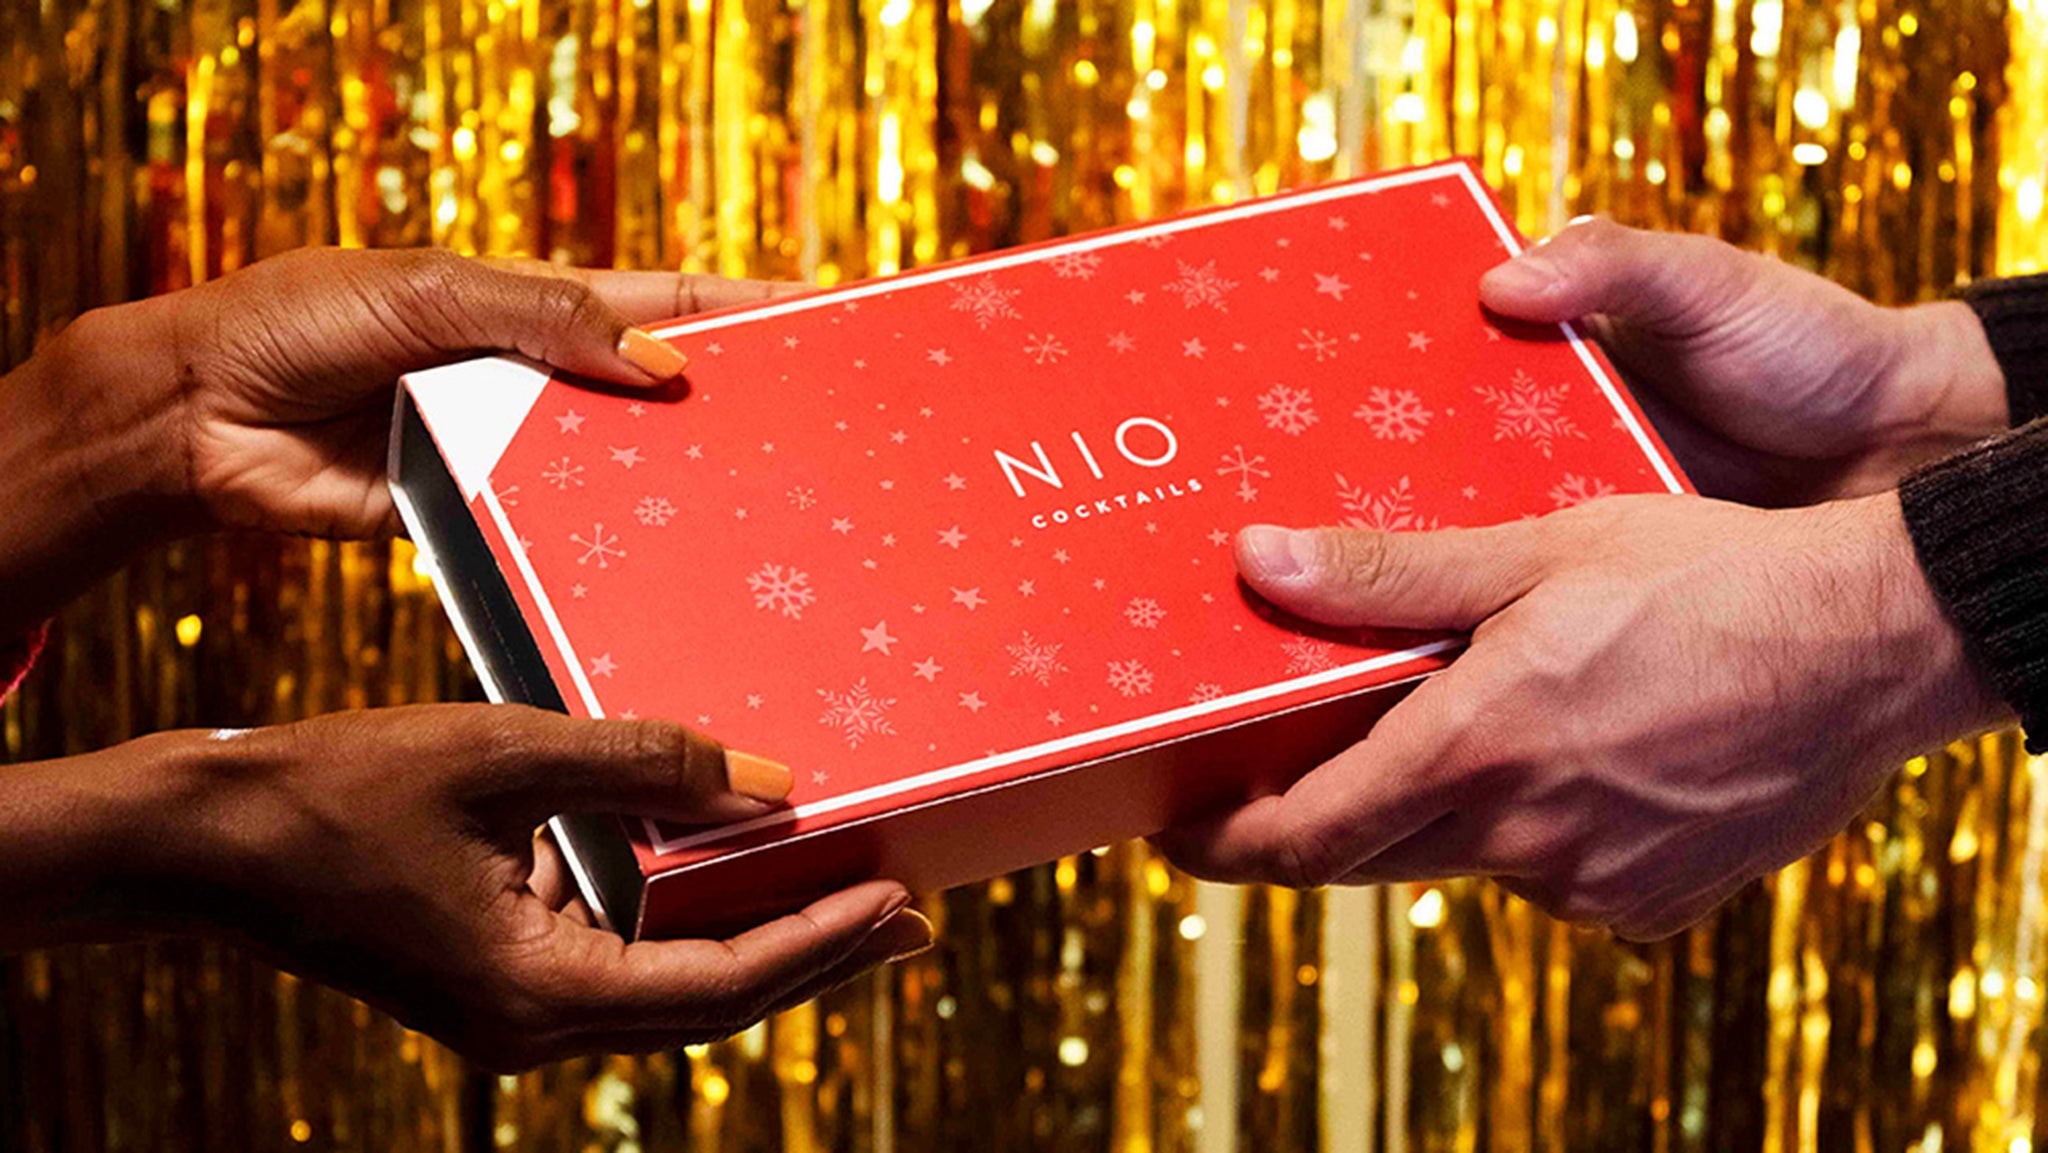 X Host & Hostess Gift Ideas | Dinner Party Gifts | NIO Cocktails